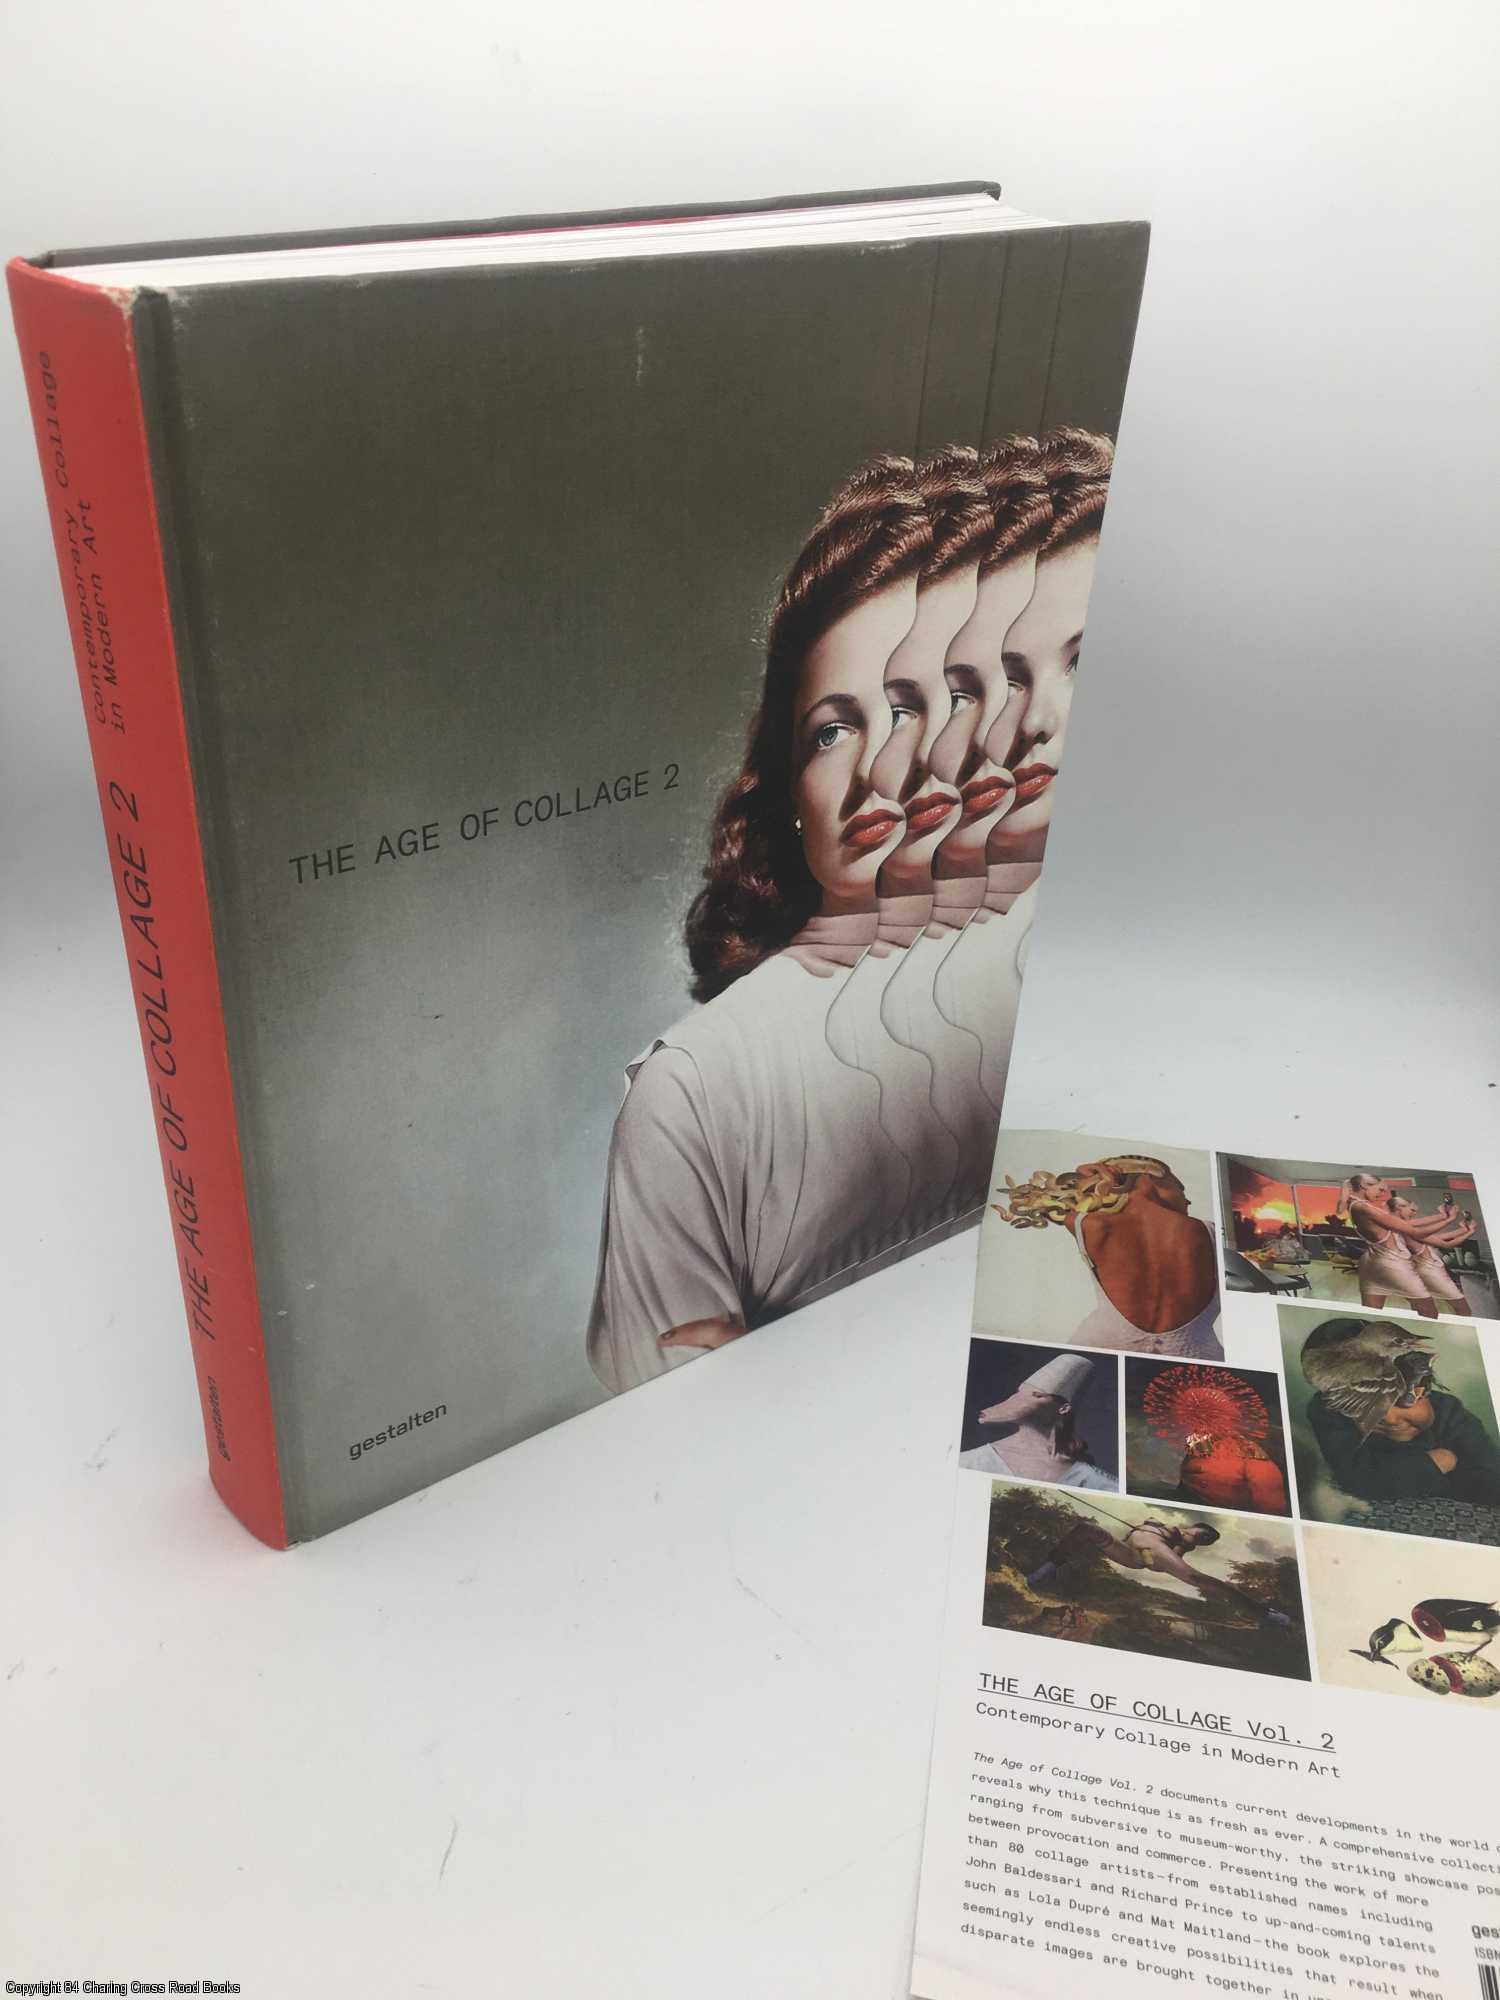 The Age of Collage Vol. 2: Contemporary Collage in Modern Art by Robert  Klanten on 84 Charing Cross Rare Books